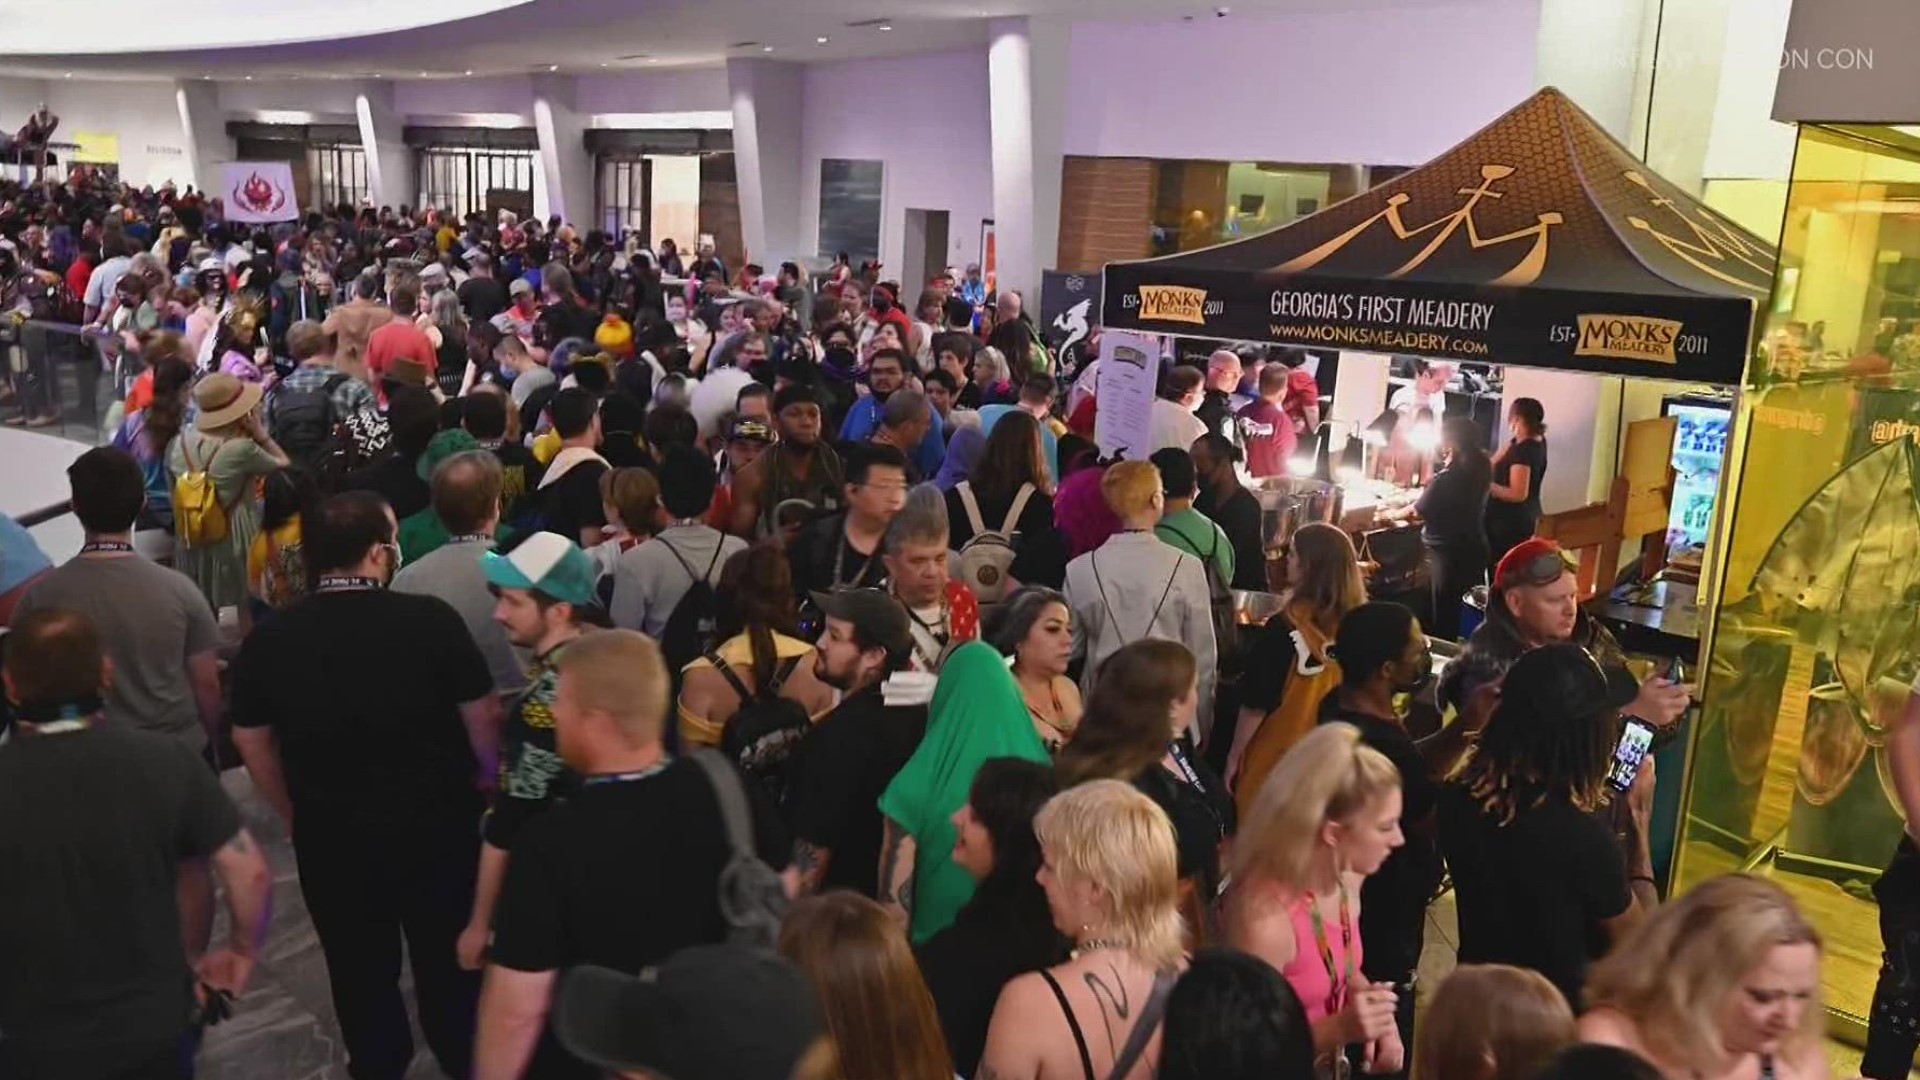 Dragon Con is one of the city's biggest conventions. Compared to last year, the convention saw double the growth.